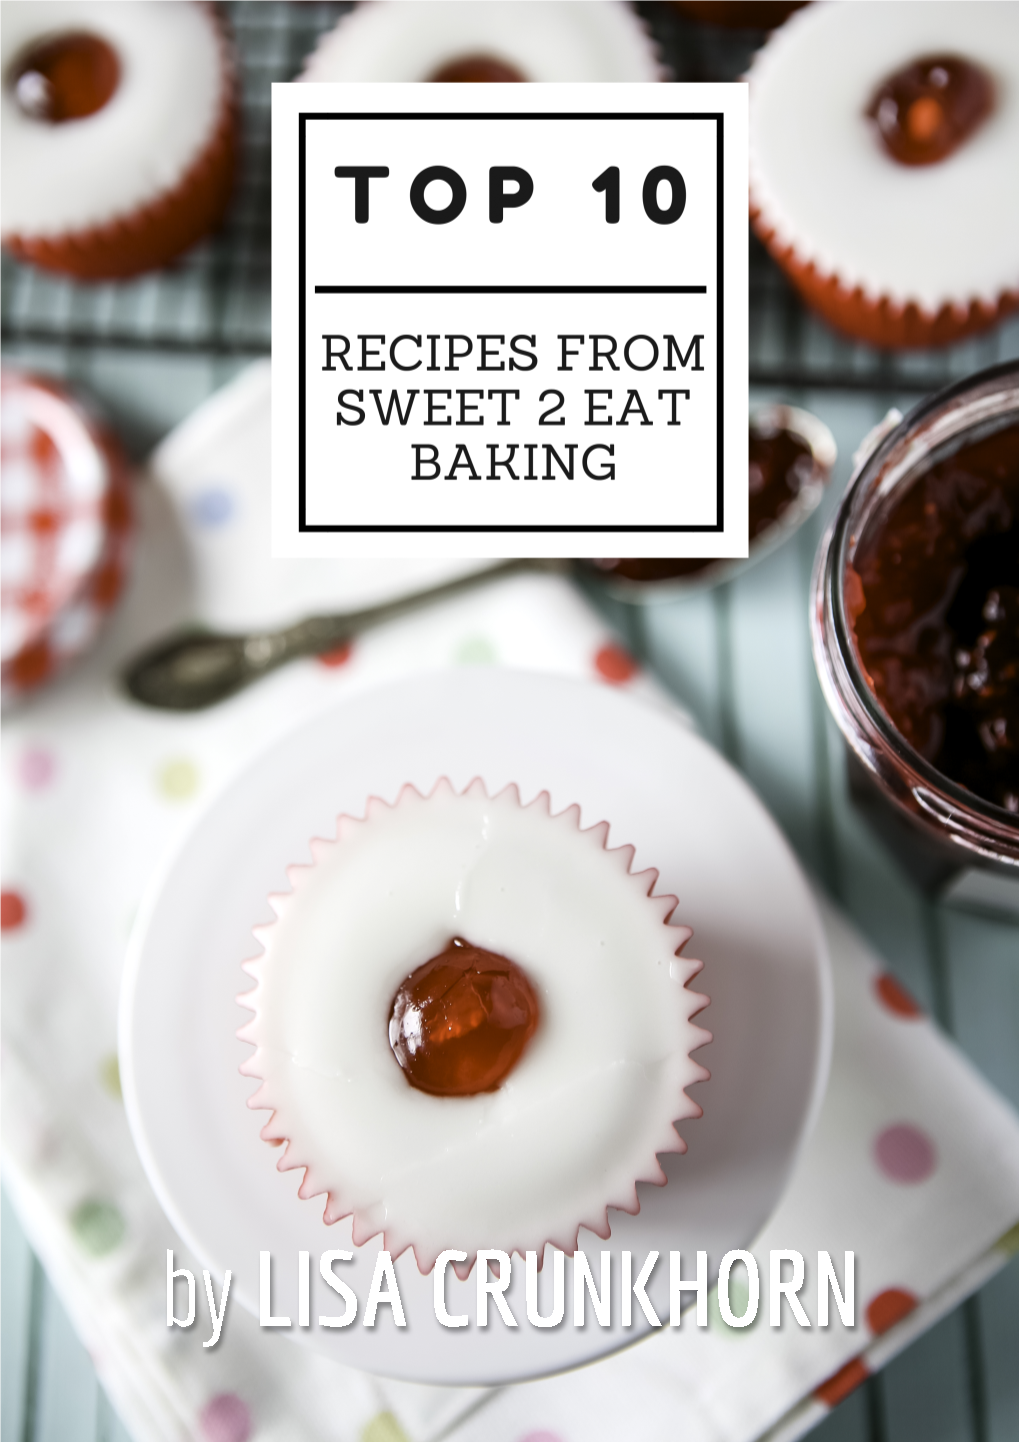 By LISA CRUNKHORN Top 10 Recipes on SWEET 2 EAT BAKING